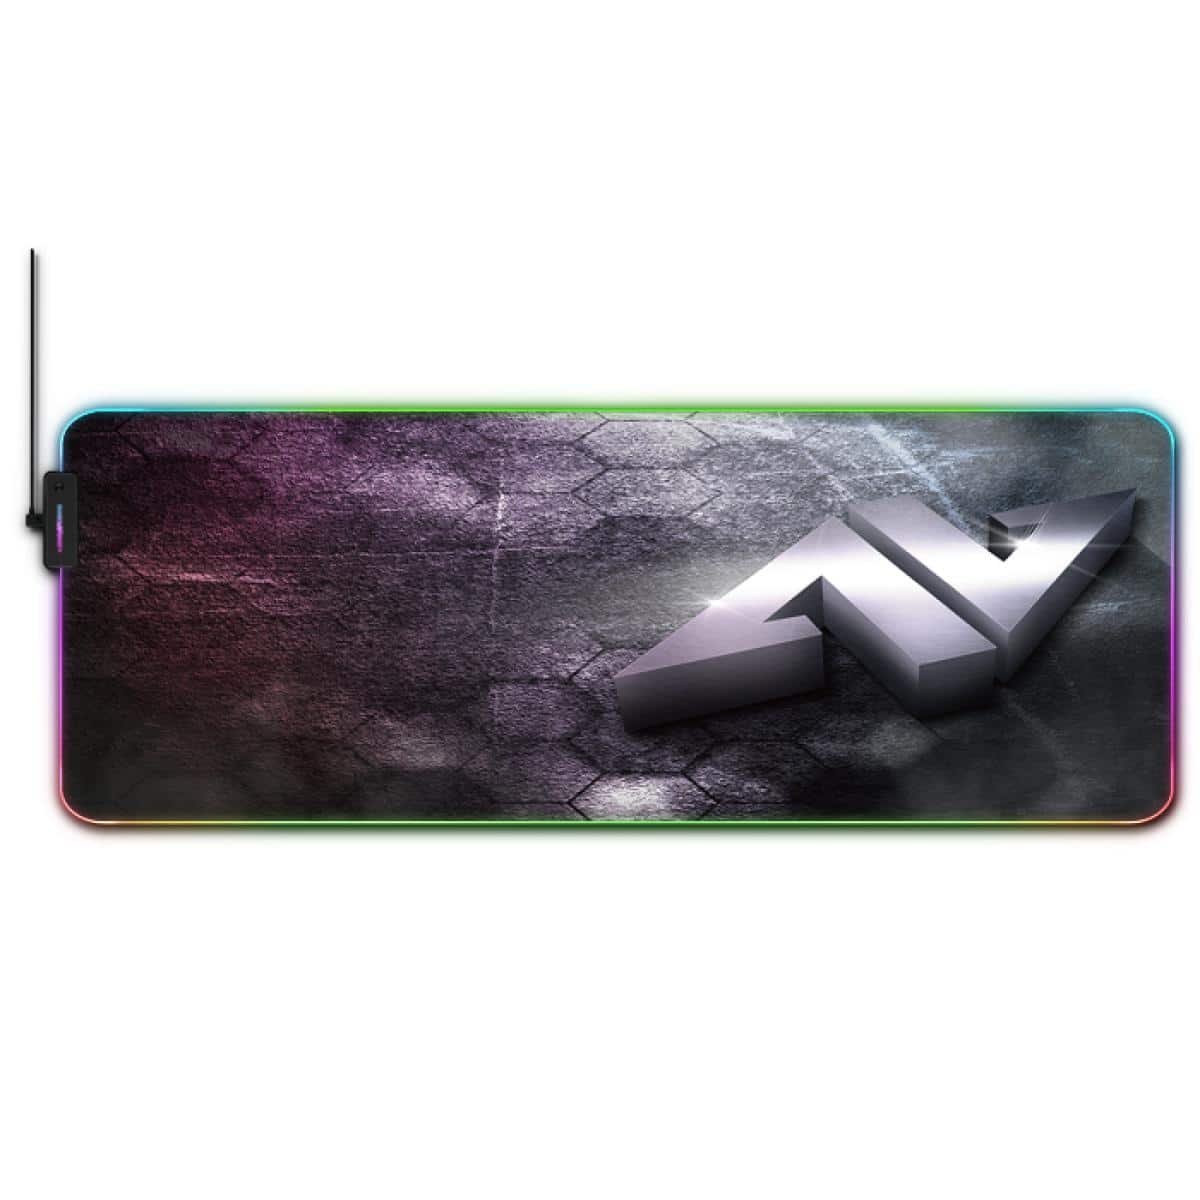 Abkoncore Lp800 Rgb – Gaming Mouse Pad |  Accessories |  Mouse Pad